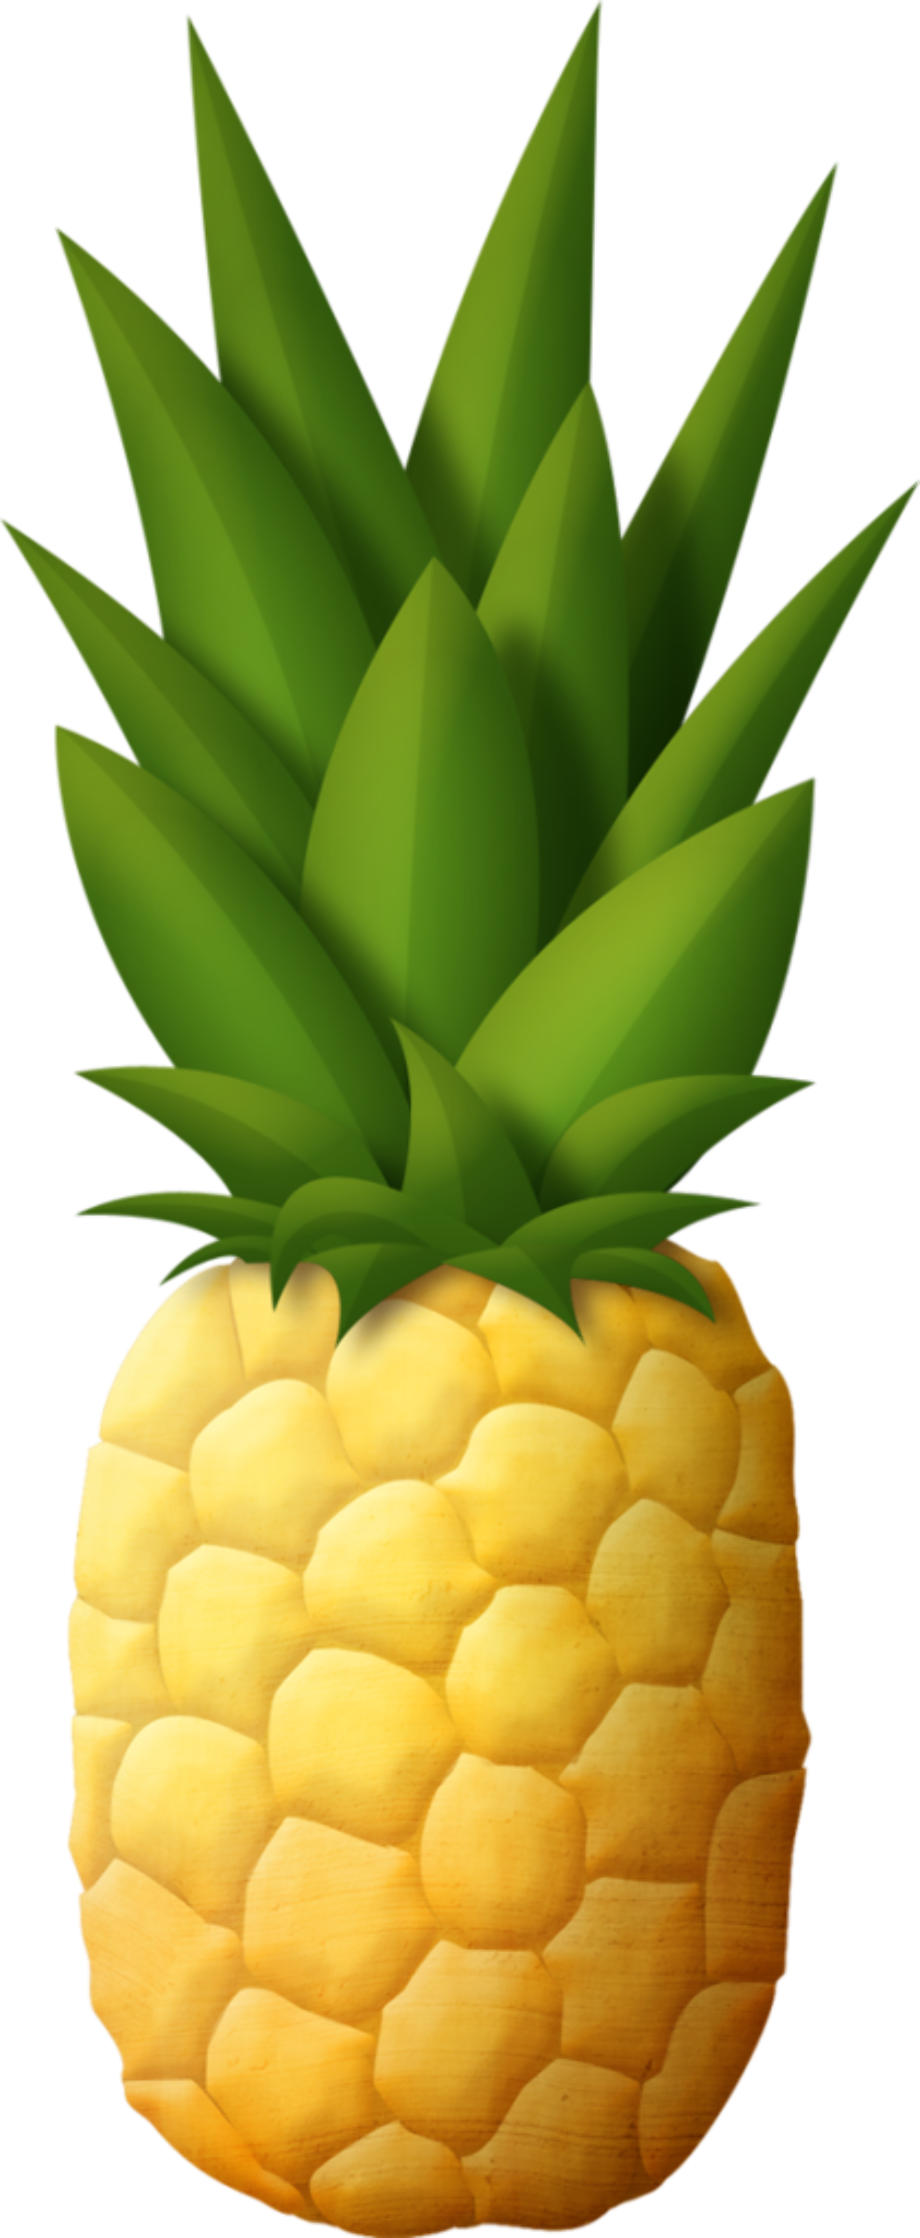 Download High Quality pineapple clipart  printable 